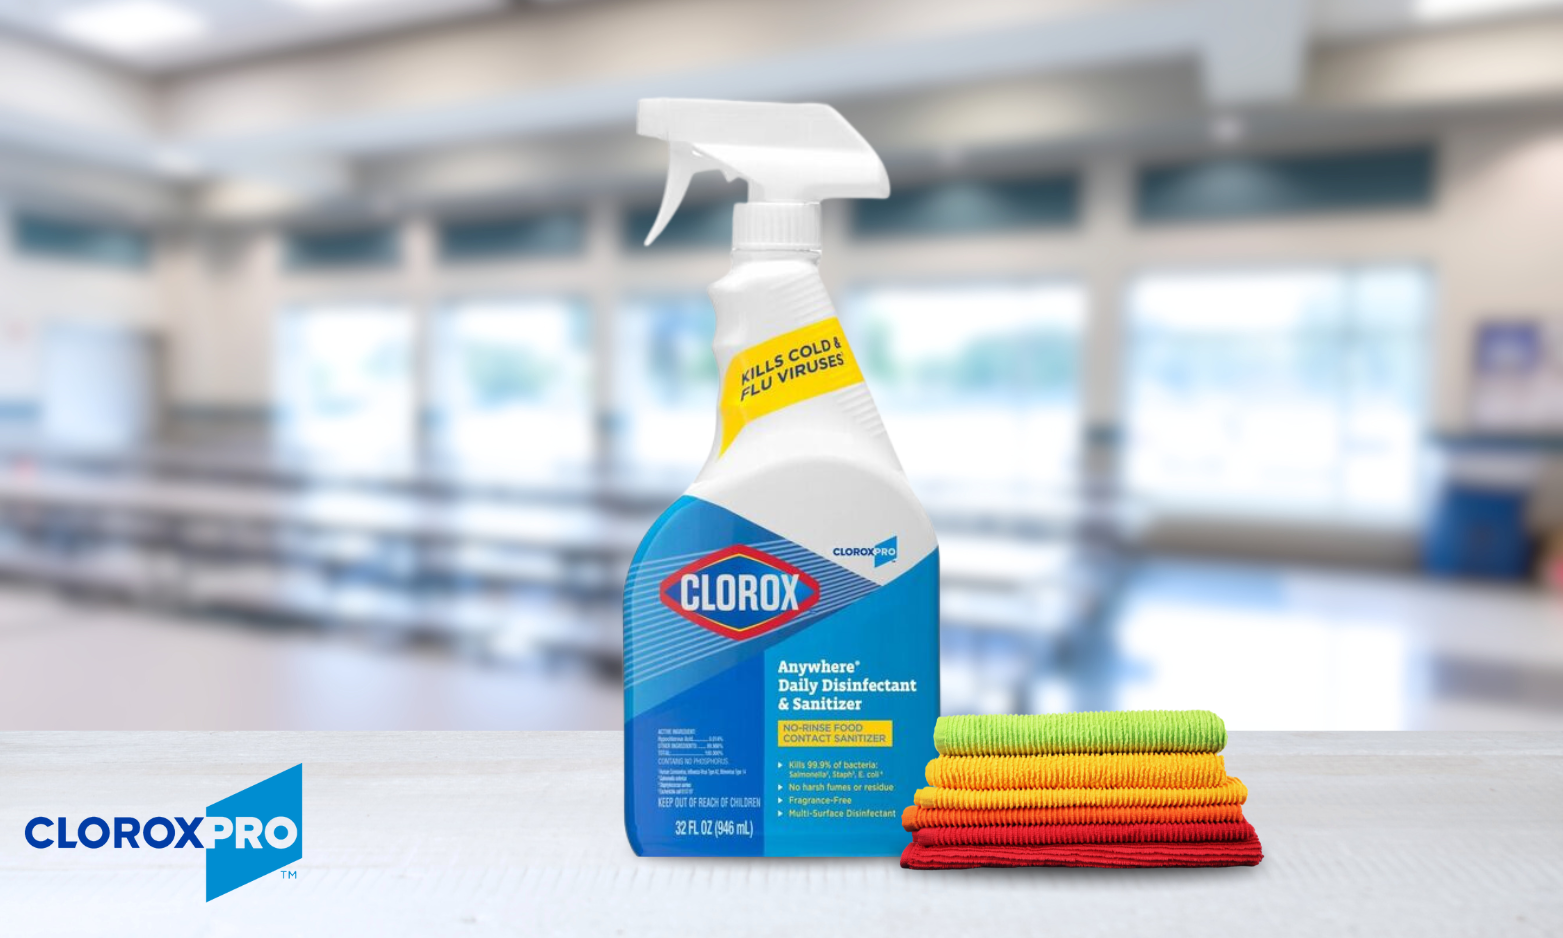 Image shows a bottle of Professional Clorox Anywhere Cleaning Spray available at Imperial Dade for food service customers in Minneapolis